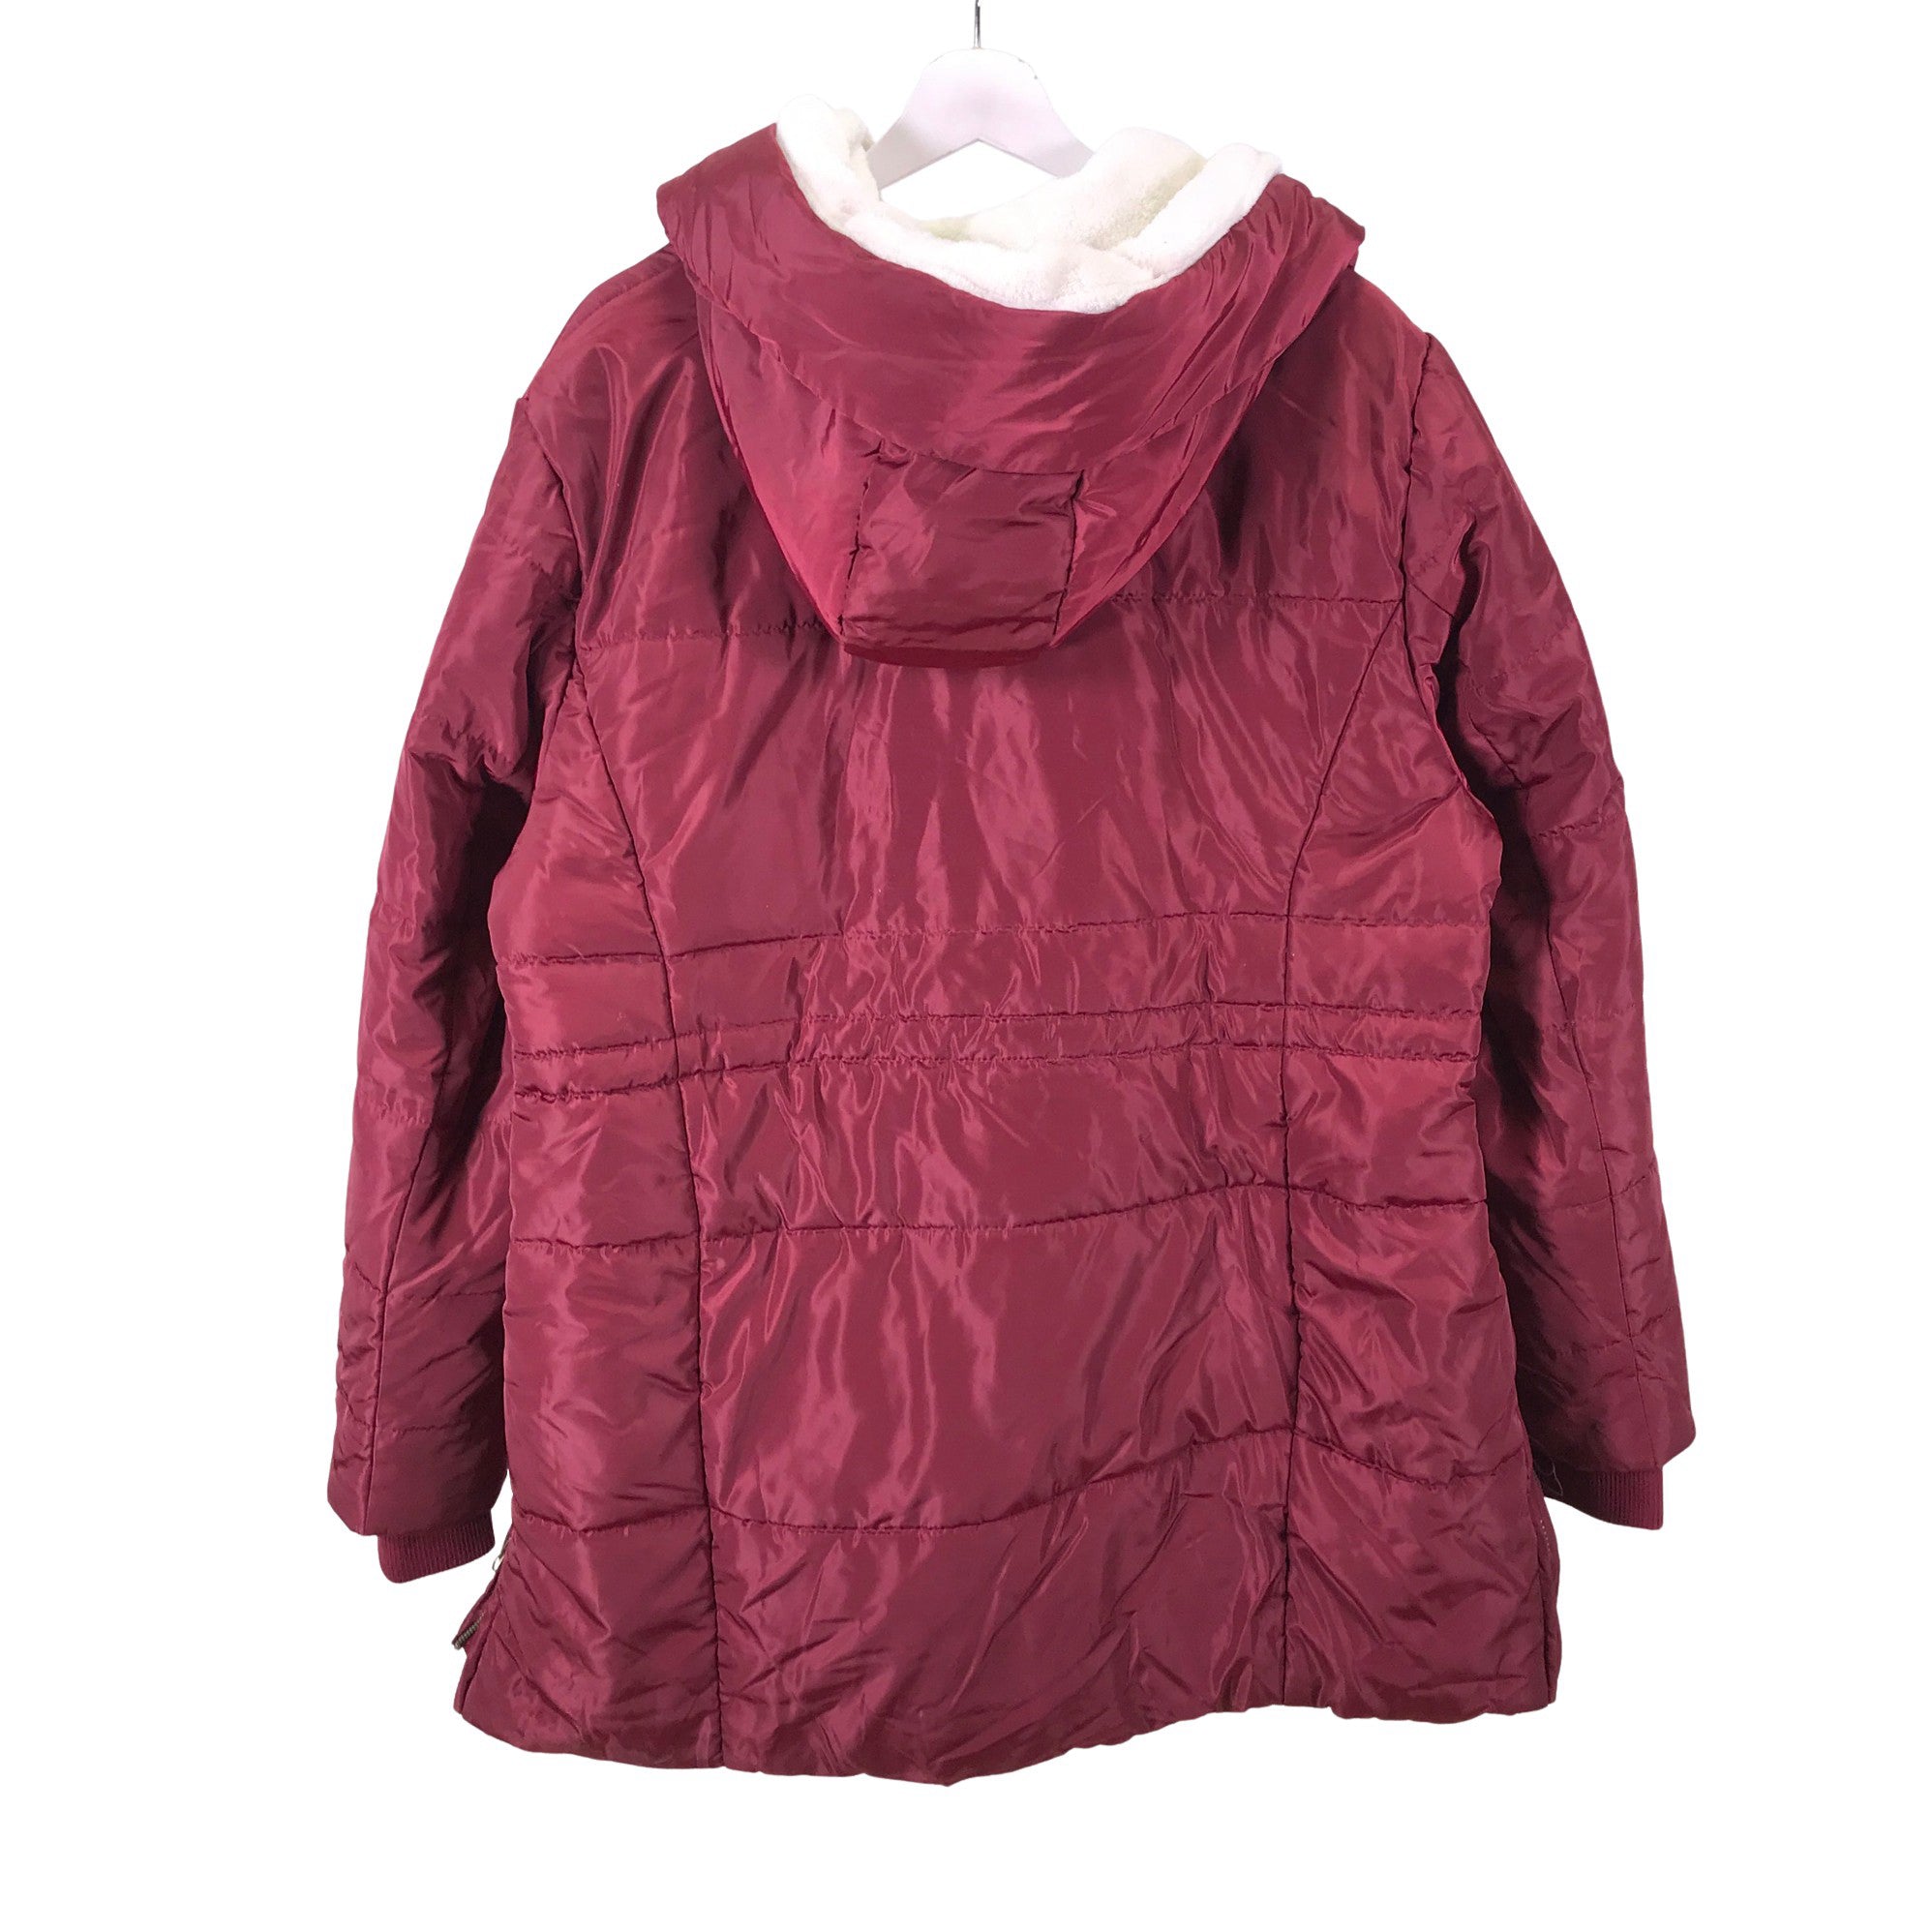 bpc bonprix collection Jackets at reasonable prices, Secondhand